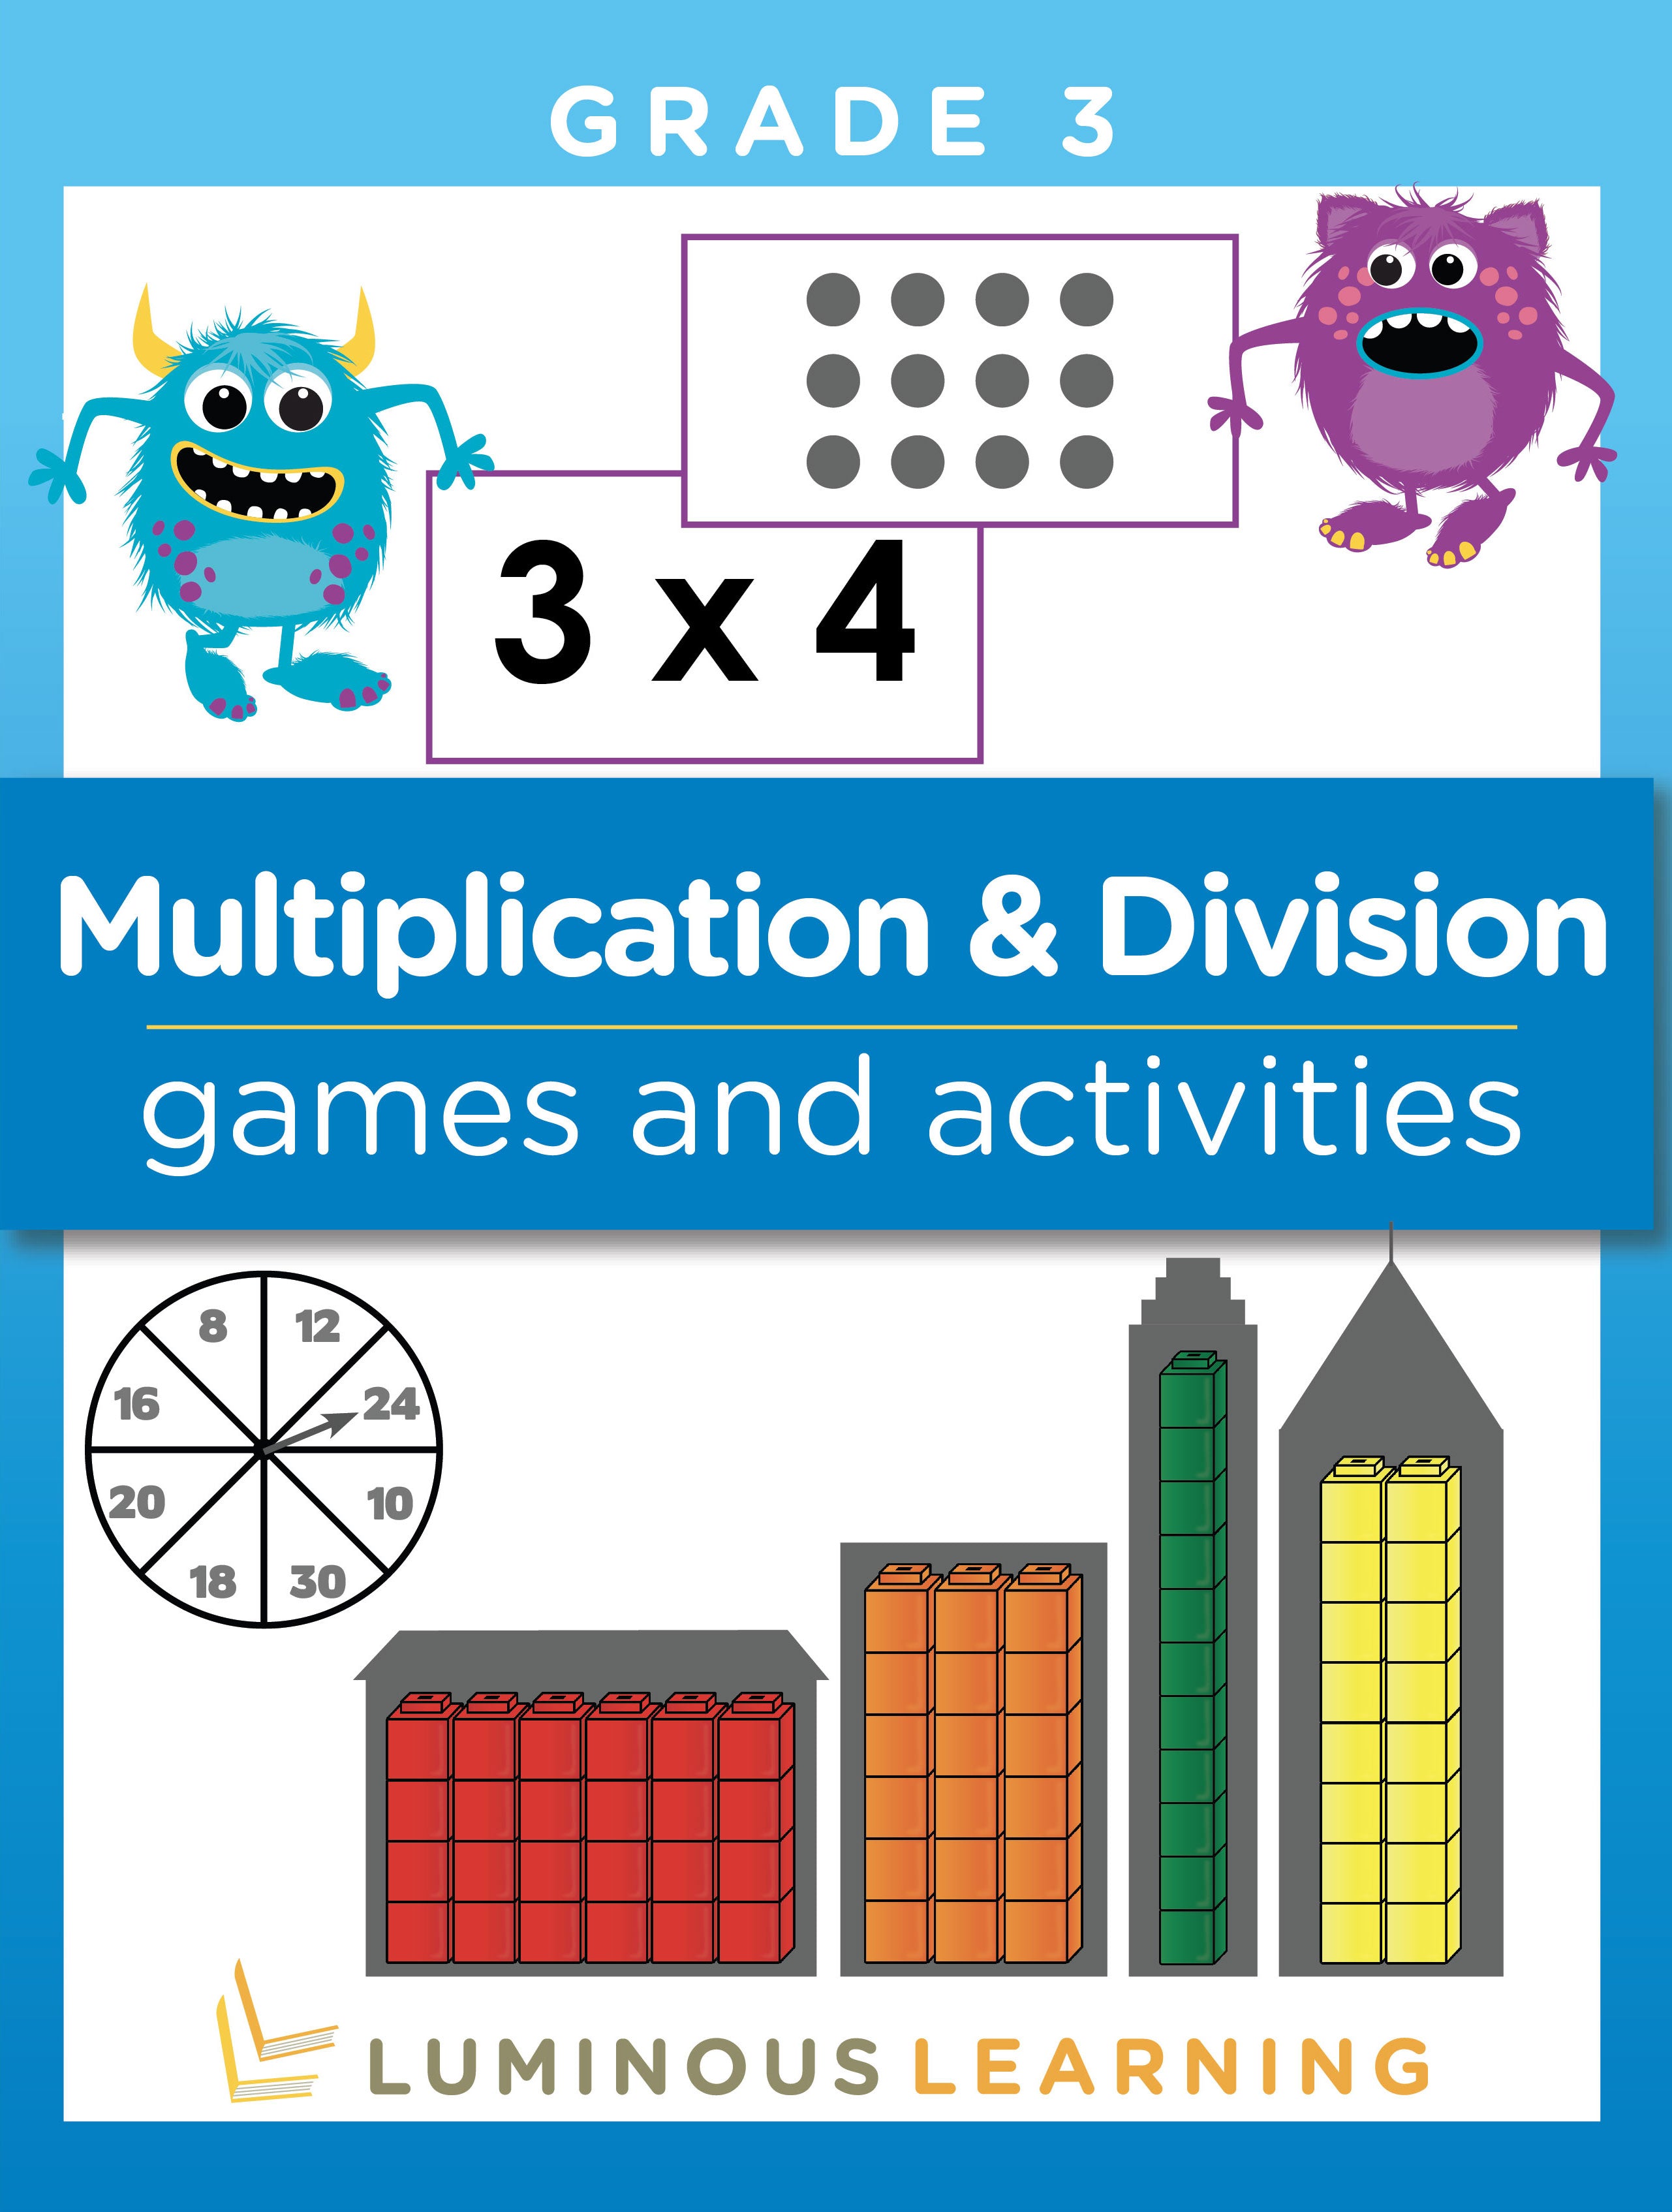 Multiplication And Division Games And Activities - Grade 3: Math Activ